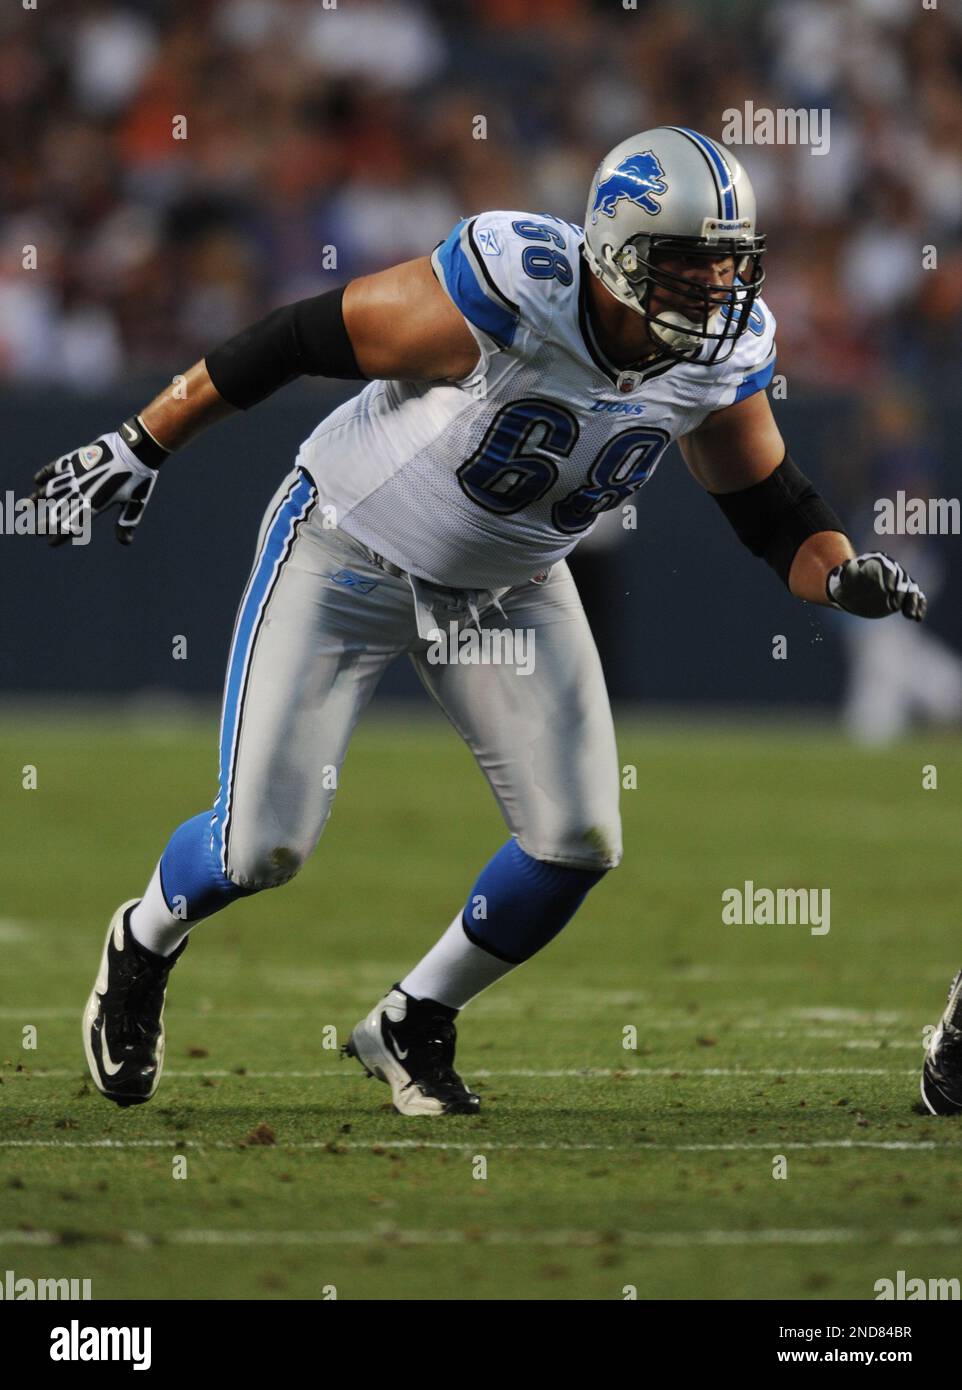 https://c8.alamy.com/comp/2ND84BR/detroit-lions-offensive-tackle-jon-jansen-plays-against-the-denver-broncos-during-the-first-half-of-a-preseason-nfl-football-game-saturday-aug-21-2010-in-denver-ap-photojack-dempsey-2ND84BR.jpg